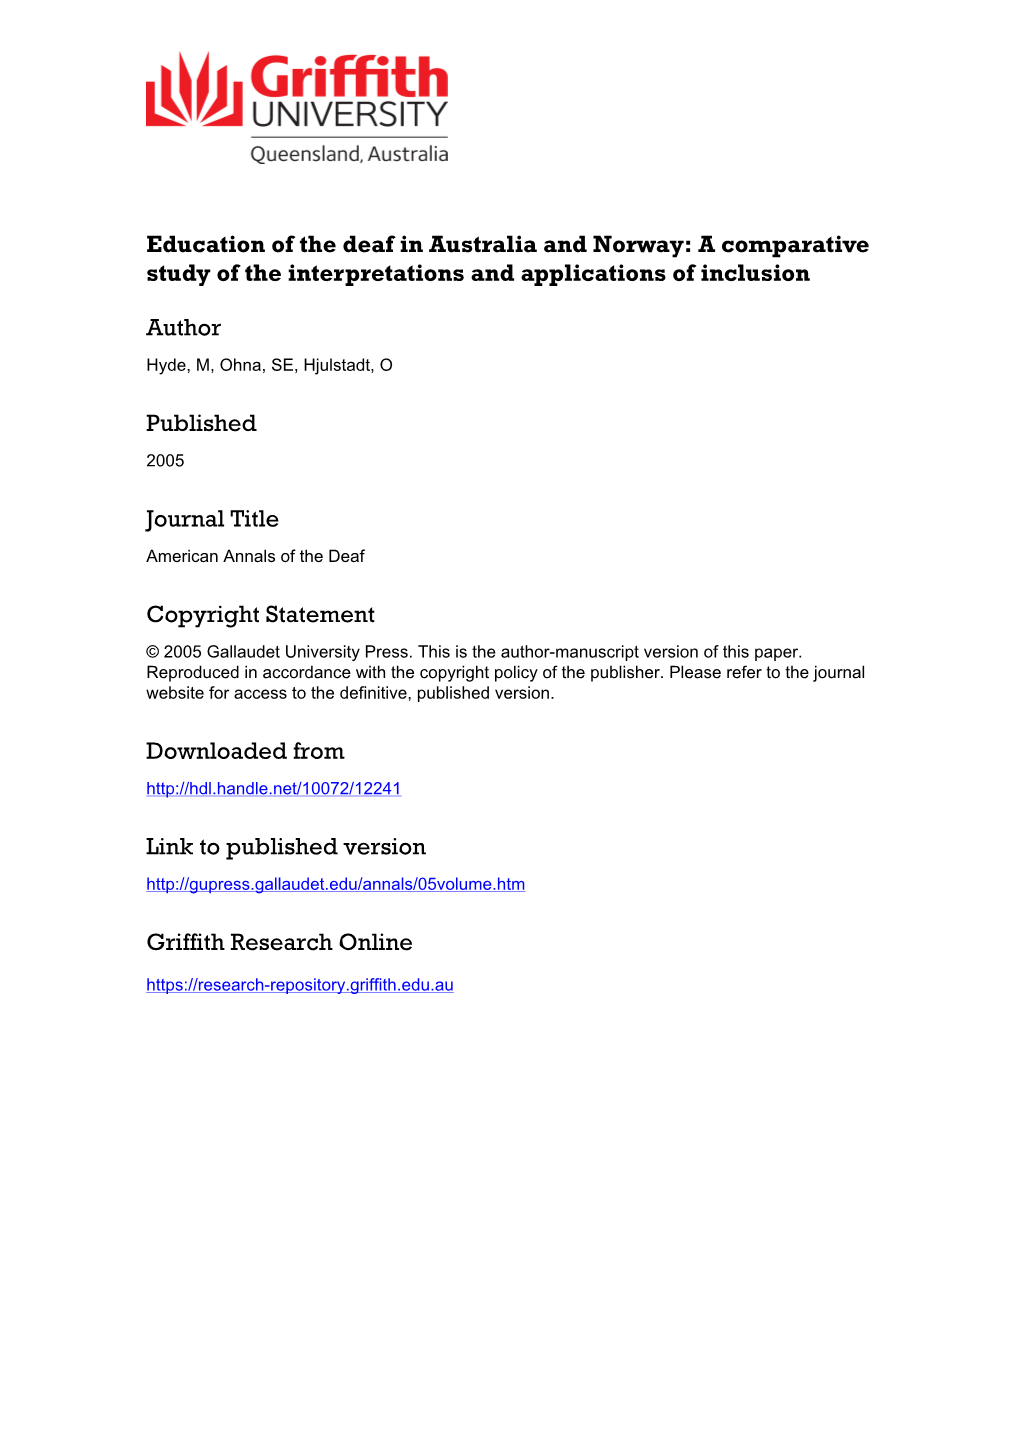 Education of the Deaf in Australia and Norway: a Comparative Study of the Interpretations and Applications of Inclusion